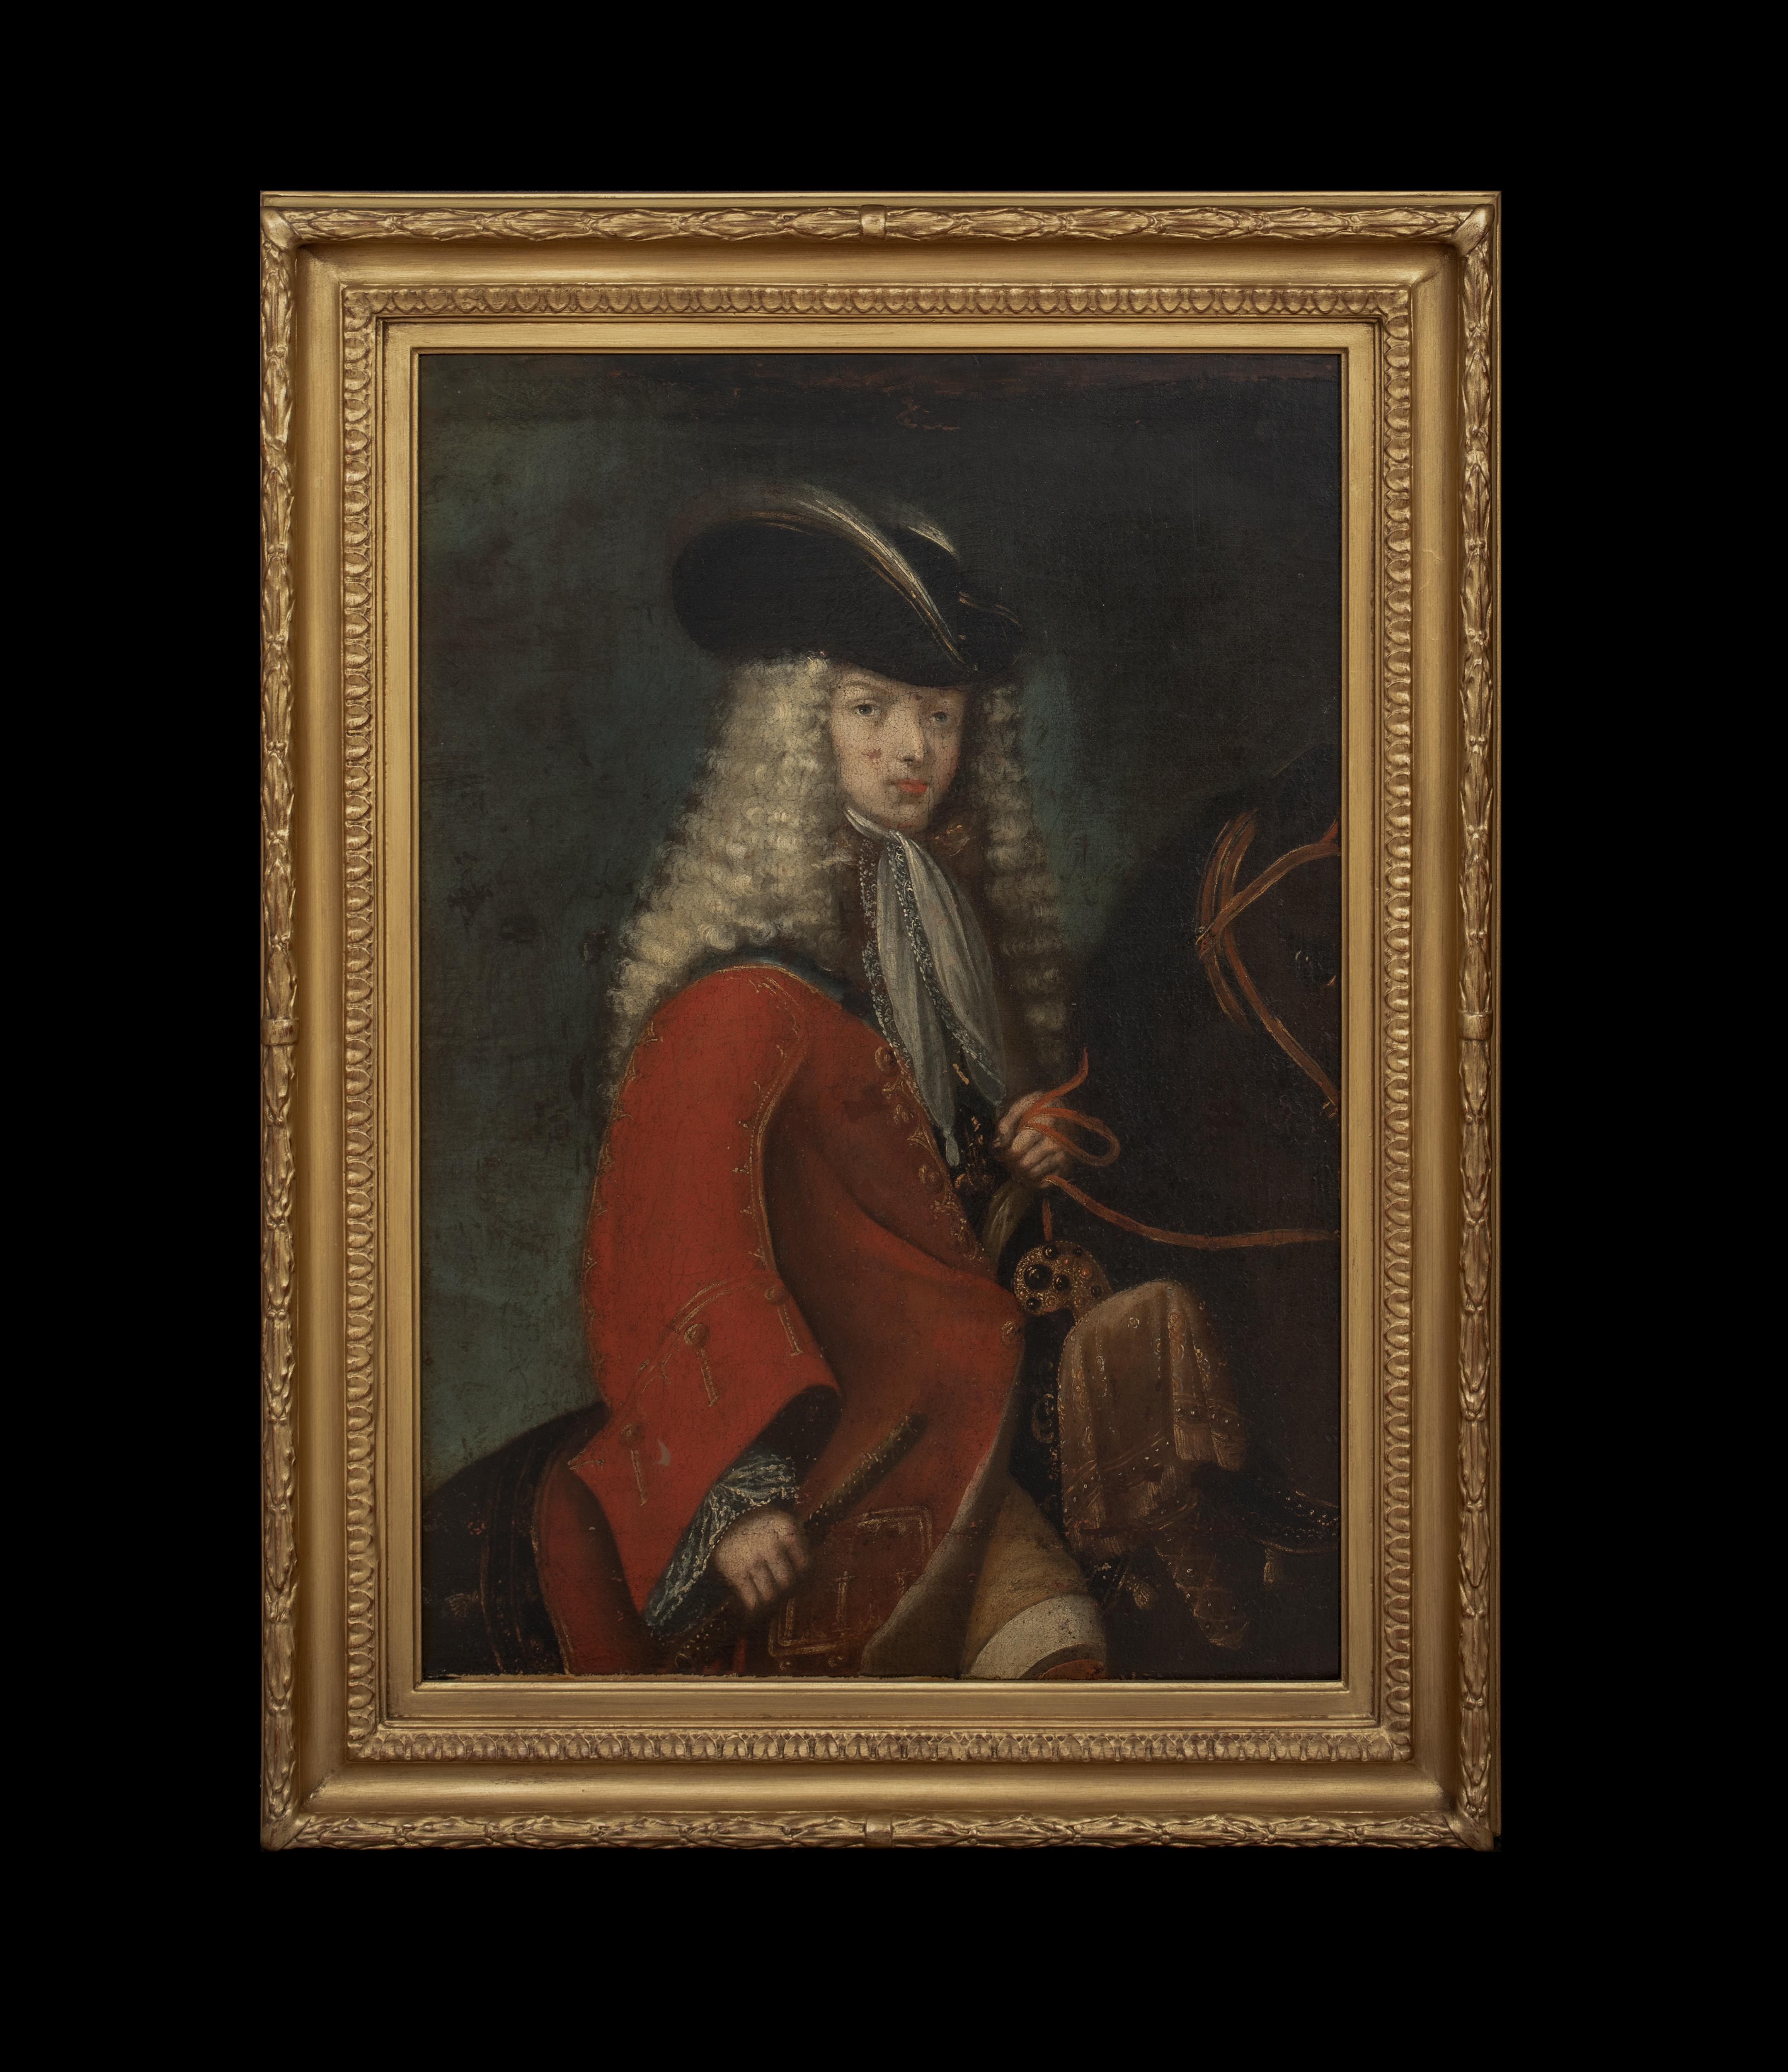 Portrait Of King Philip V (1683-1746) of Spain, 18th Century   Spanish School - Painting by Unknown